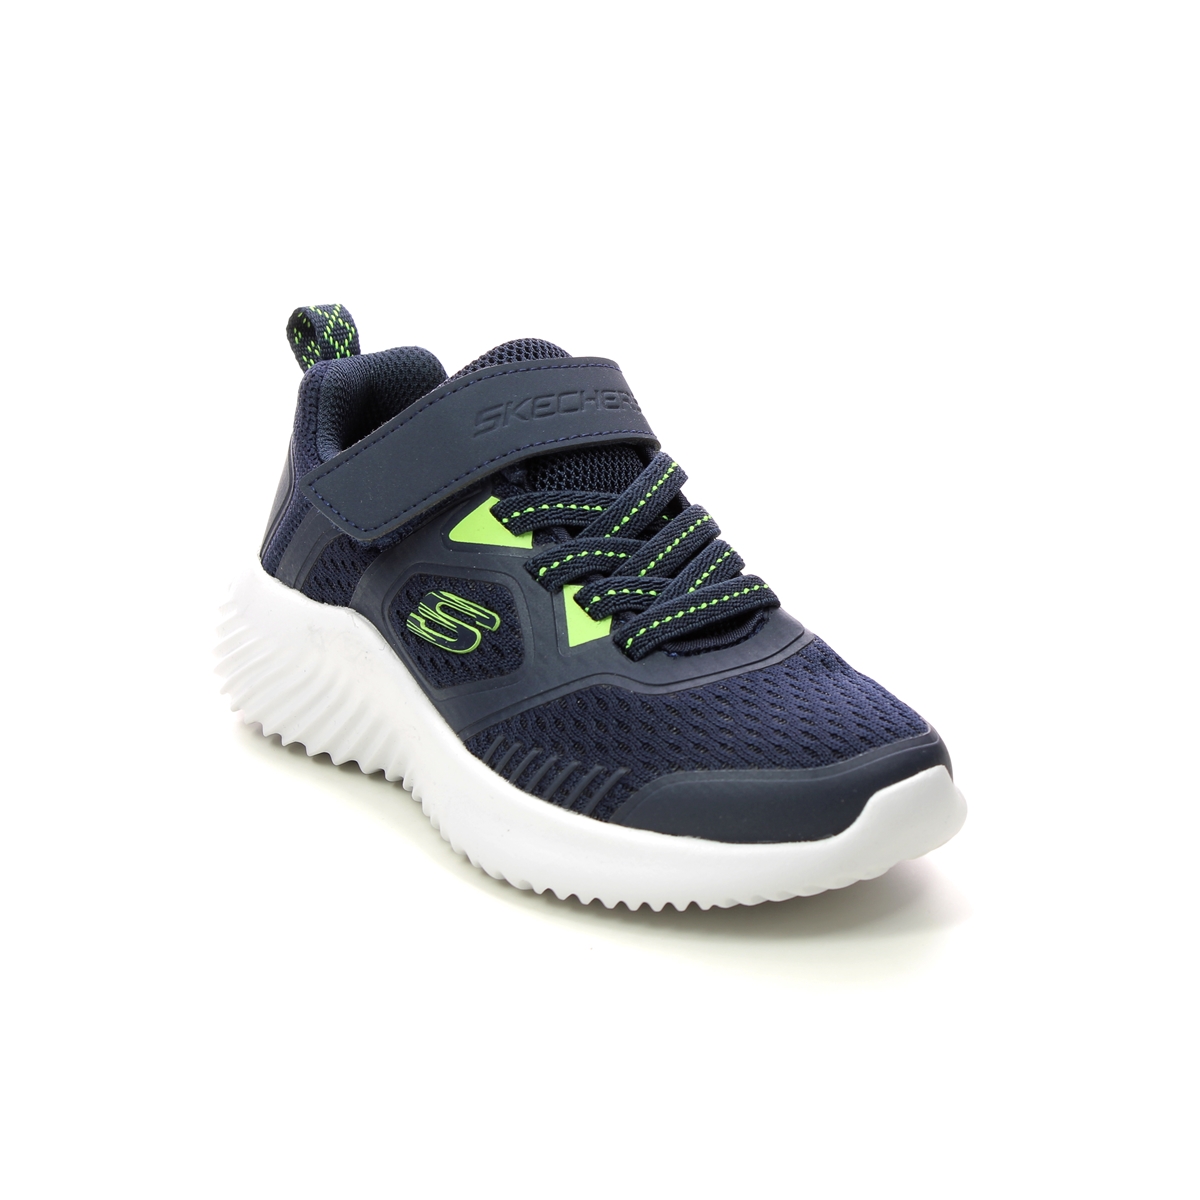 Skechers Bounder Navy Lime Kids Trainers 403736L In Size 27 In Plain Navy Lime For kids